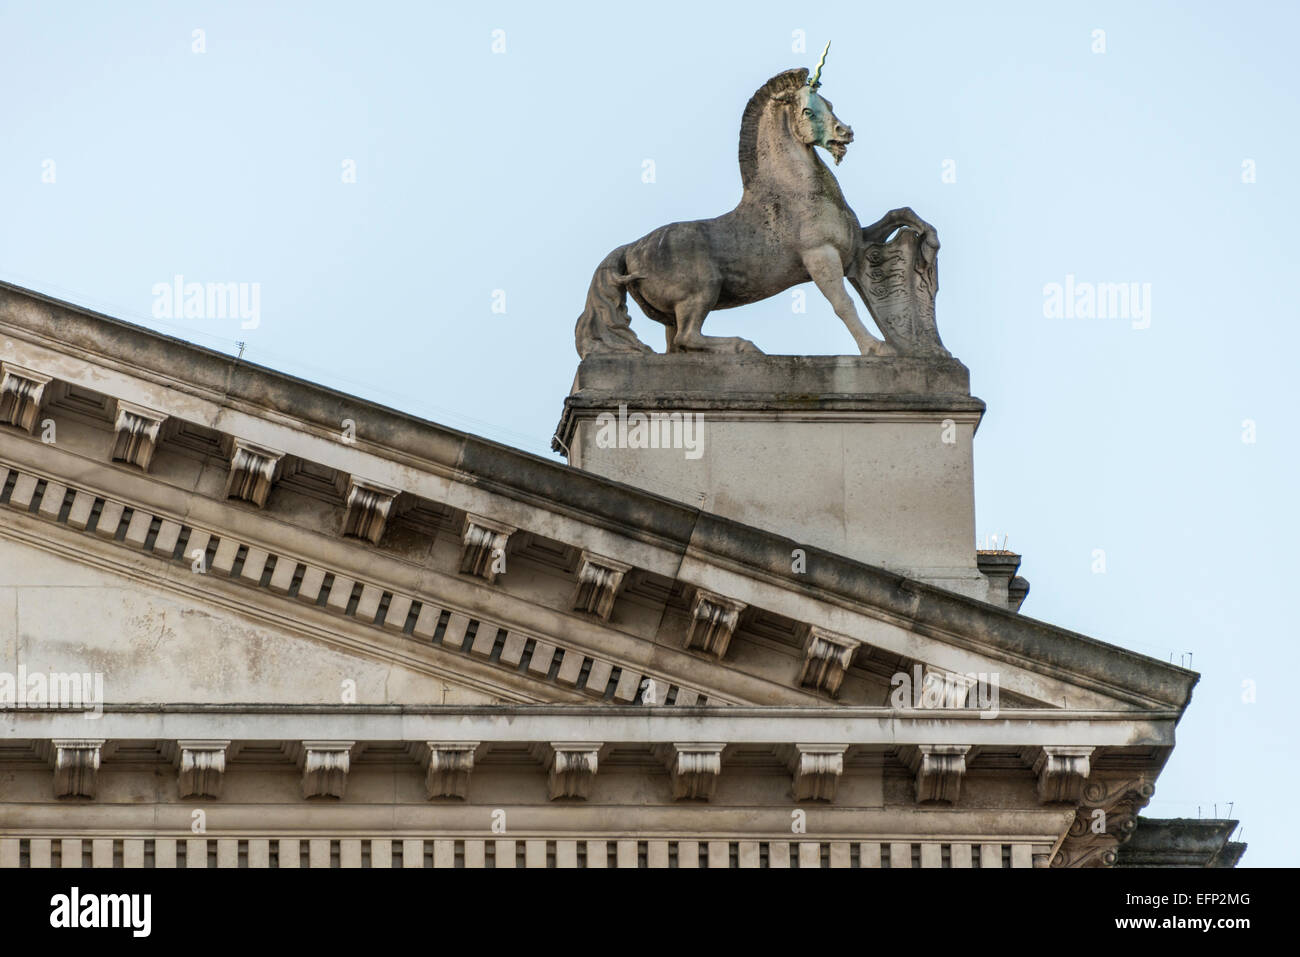 Unicorn statue on top of Tate Britain, an art gallery in London Stock Photo